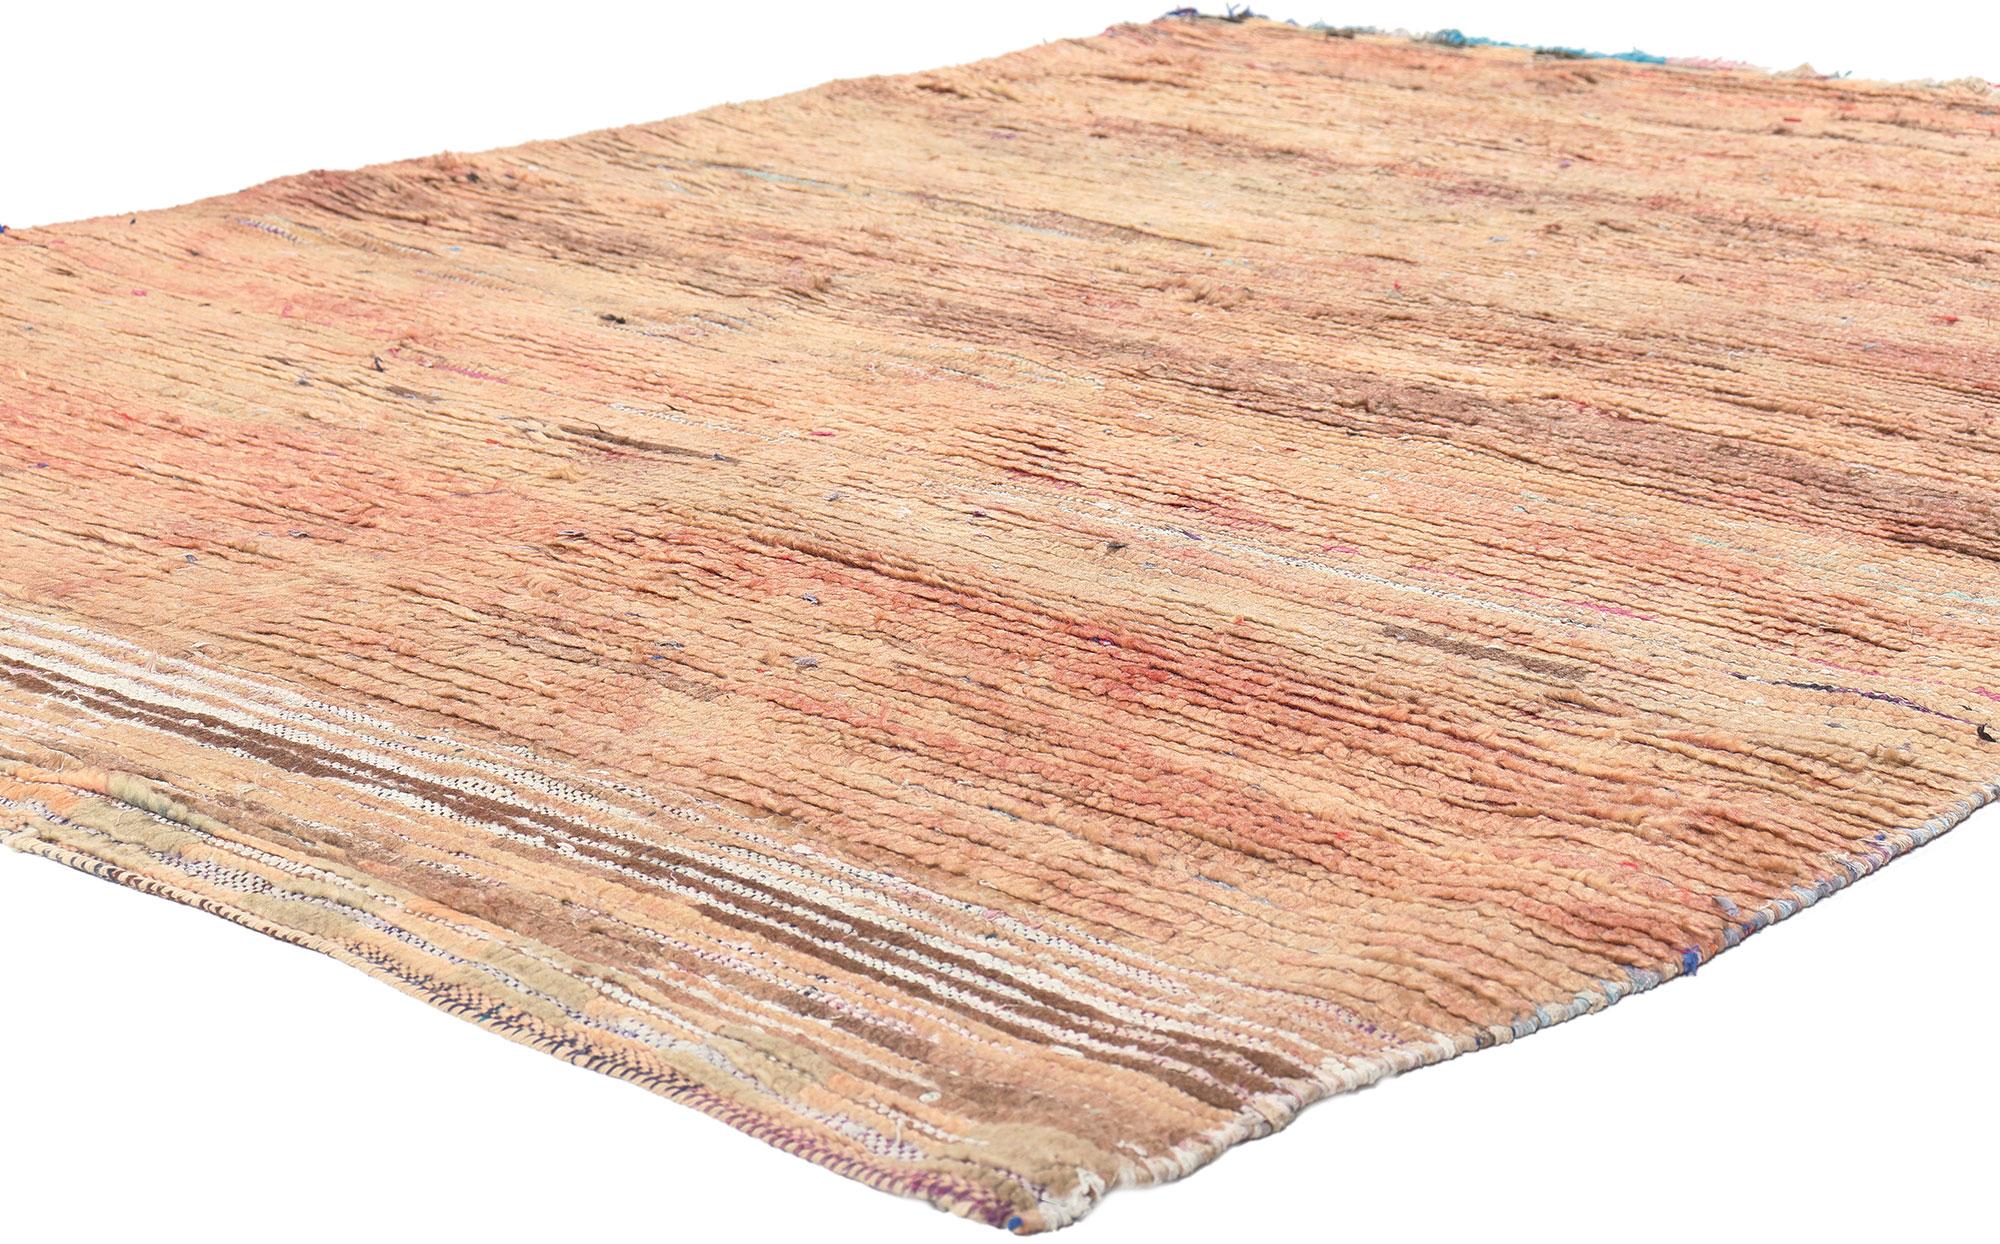 21504 Vintage Boujad Boucherouite Moroccan Rag Rug, 05'09 x 08'04. Celebrate the vibrant spirit of Boujad Boucherouite rugs, originating from the lively city of Boujad in the Khouribga region. These Moroccan rugs are cherished for their eccentric